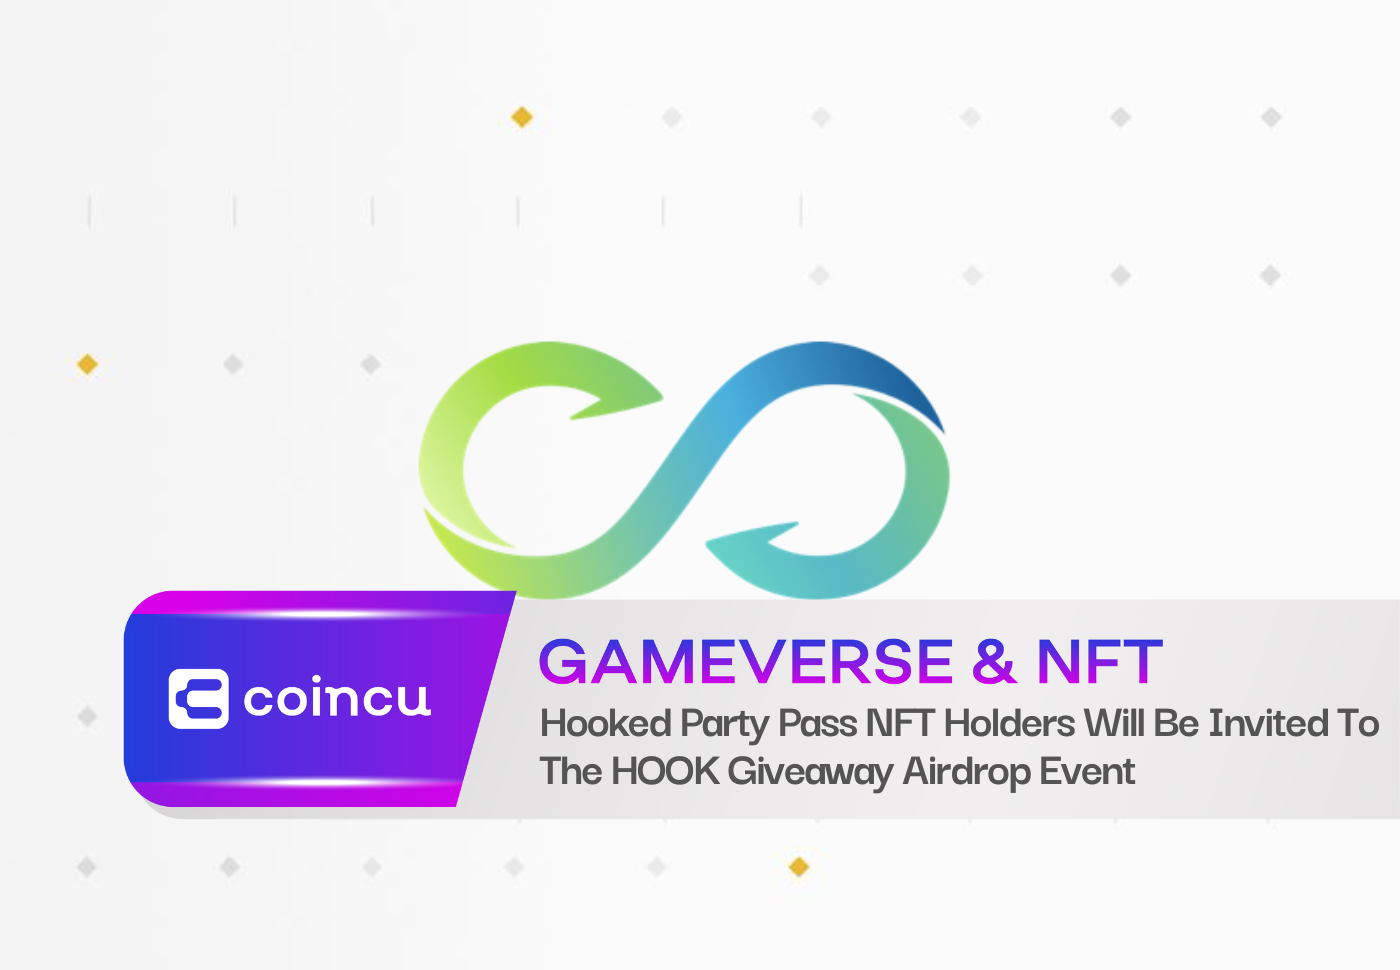 Hooked Protocol Organize Events For Hooked Party Pass NFT Holders